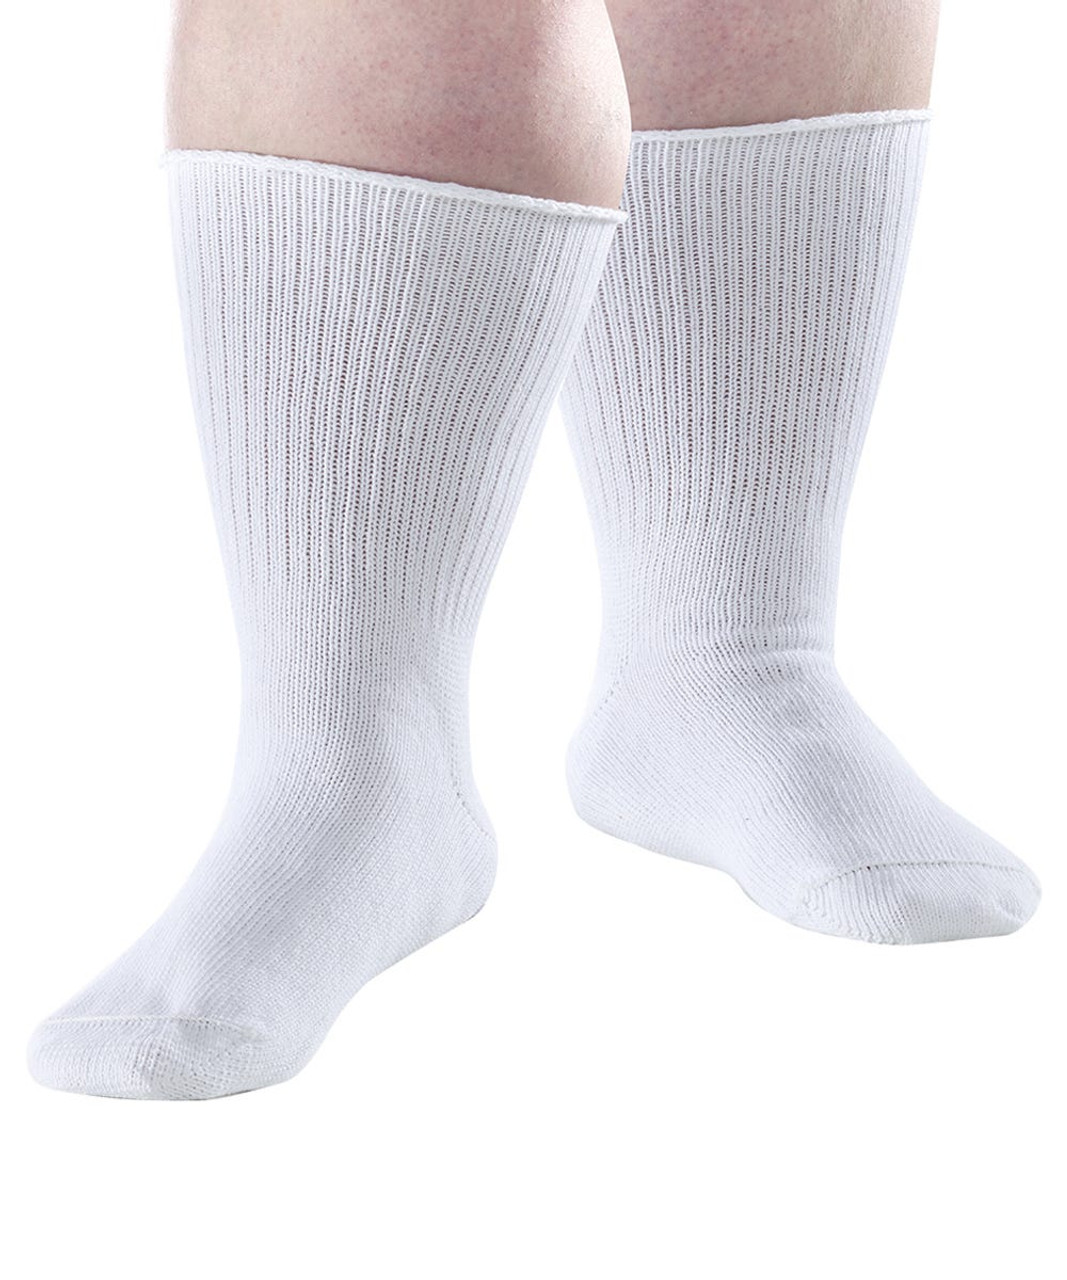 Silverts SV19170 2 Pack - Extra Wide Edema Diabetic Socks for Men and Women White, Size=XL, SV19170-SV39-XL